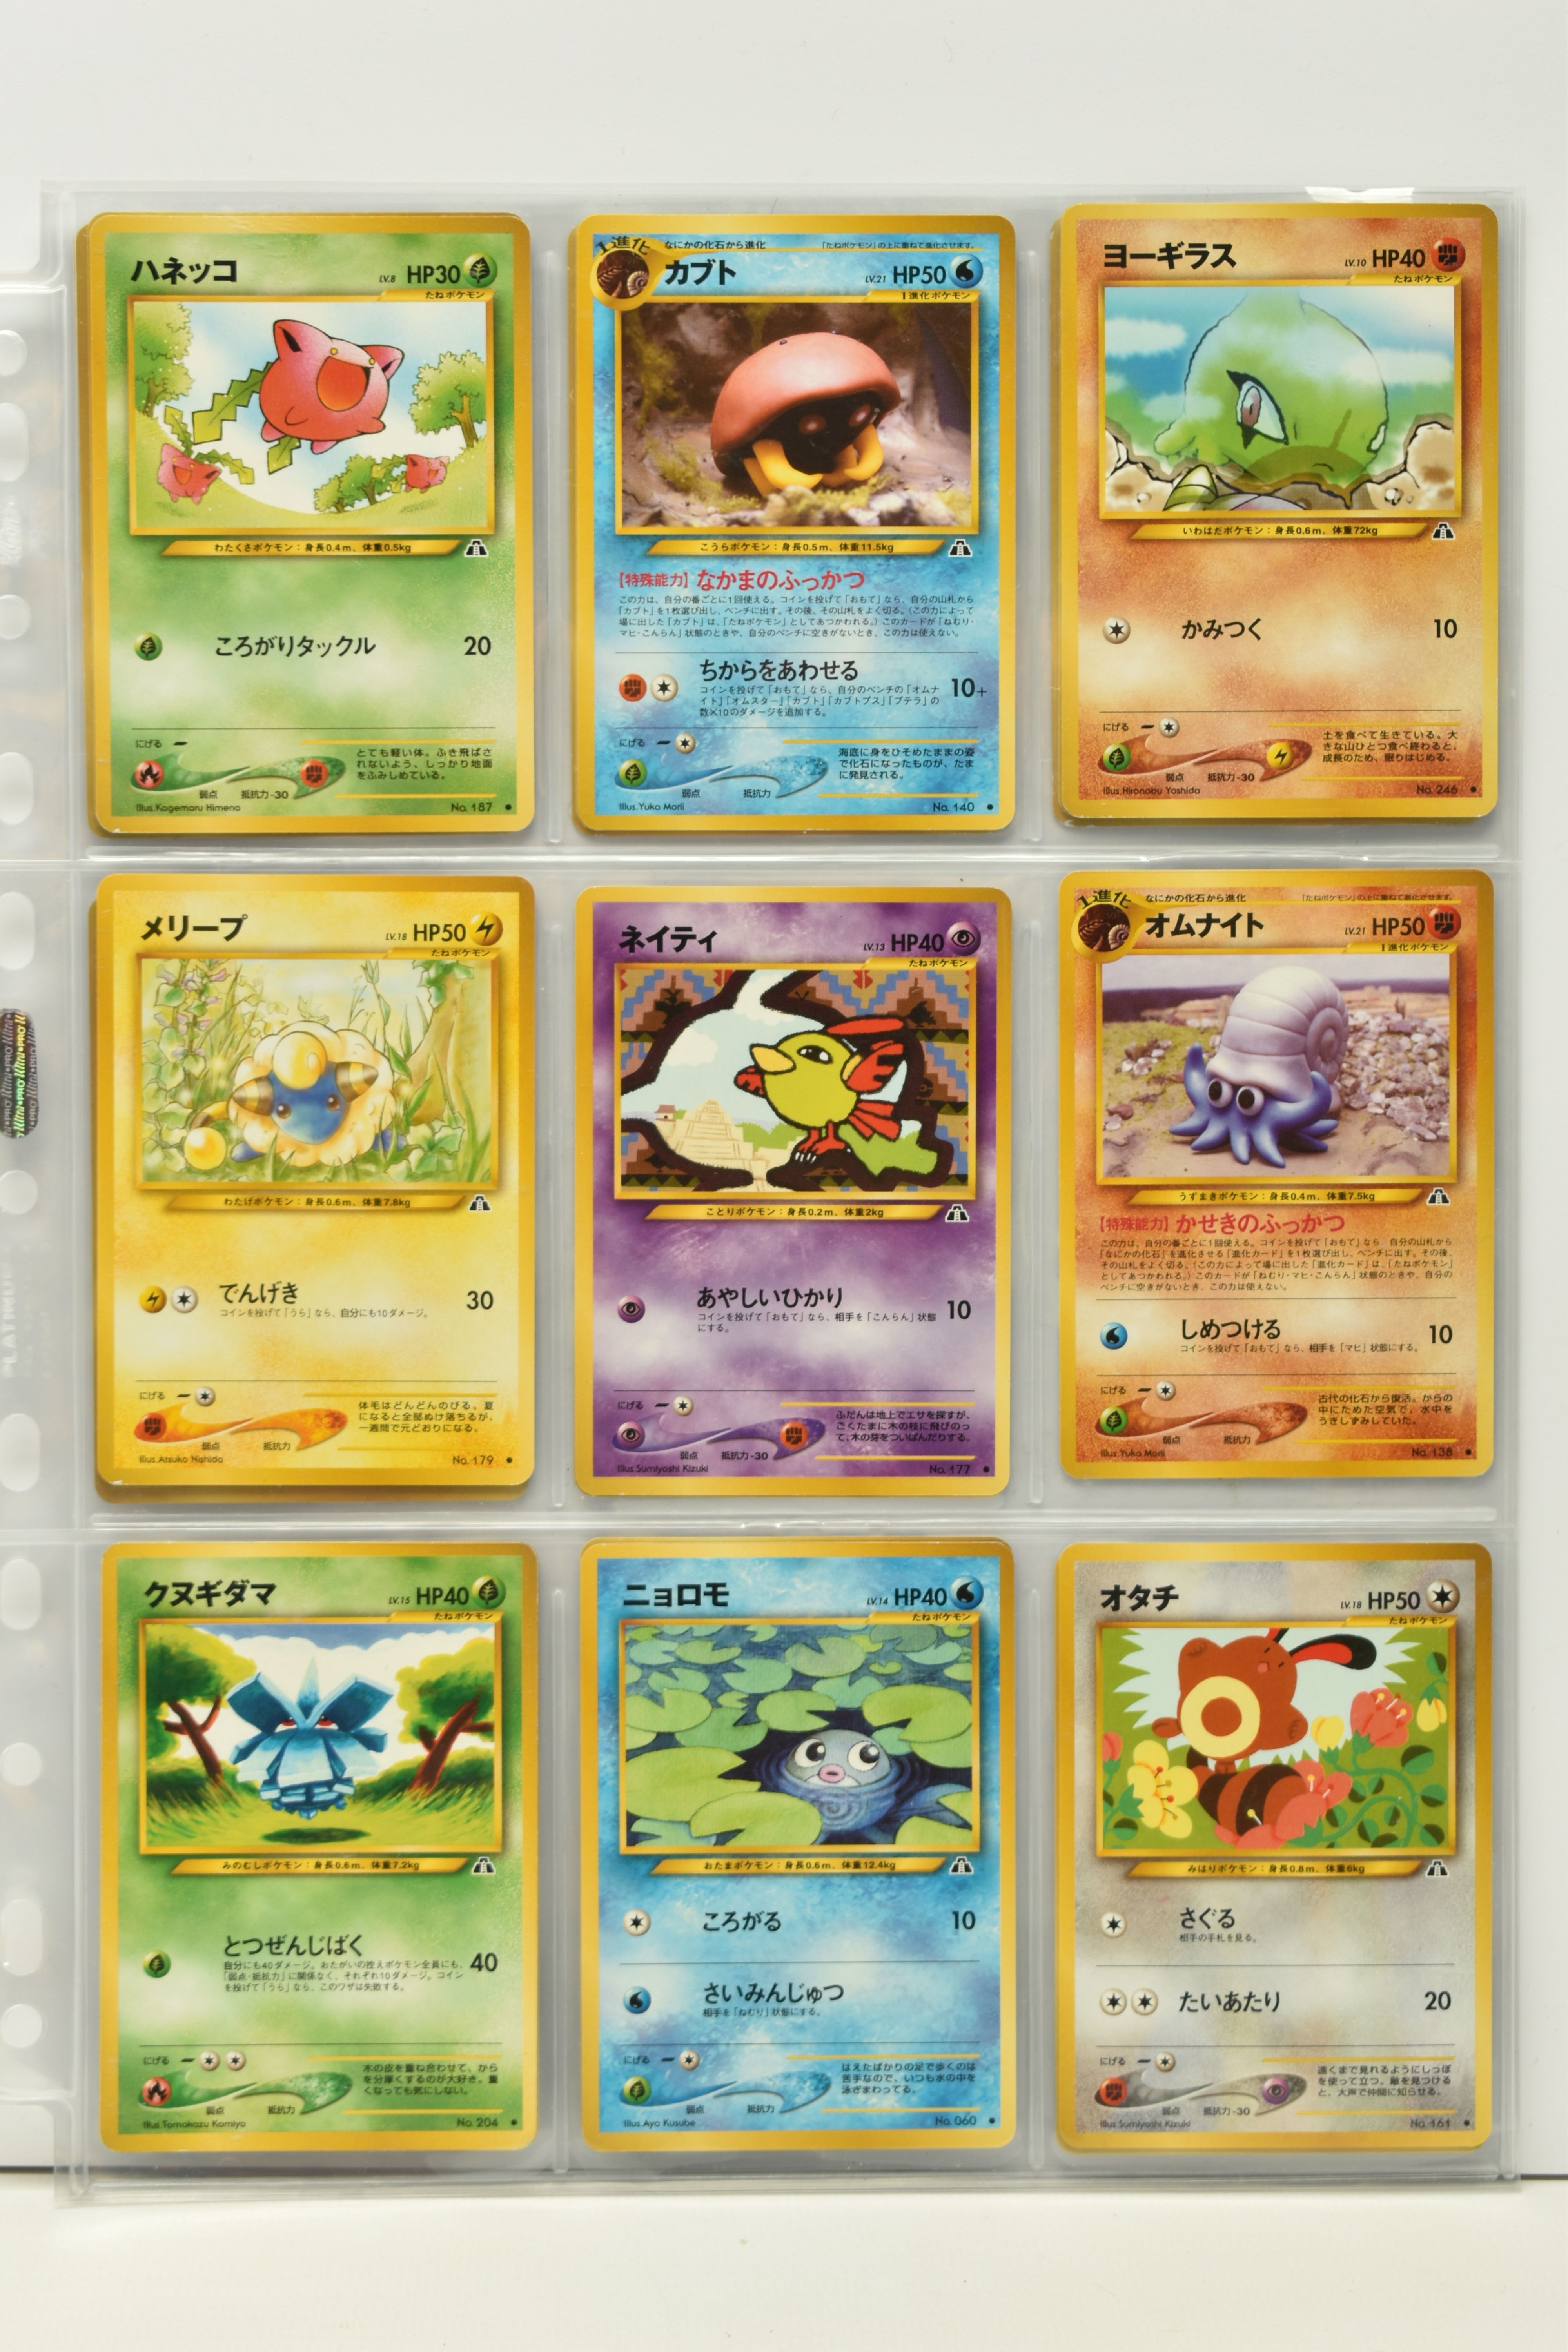 POKEMON JAPANESE NEO DISCOVERY COLECTION, contains most of the set including the holographic Espeon, - Image 5 of 7